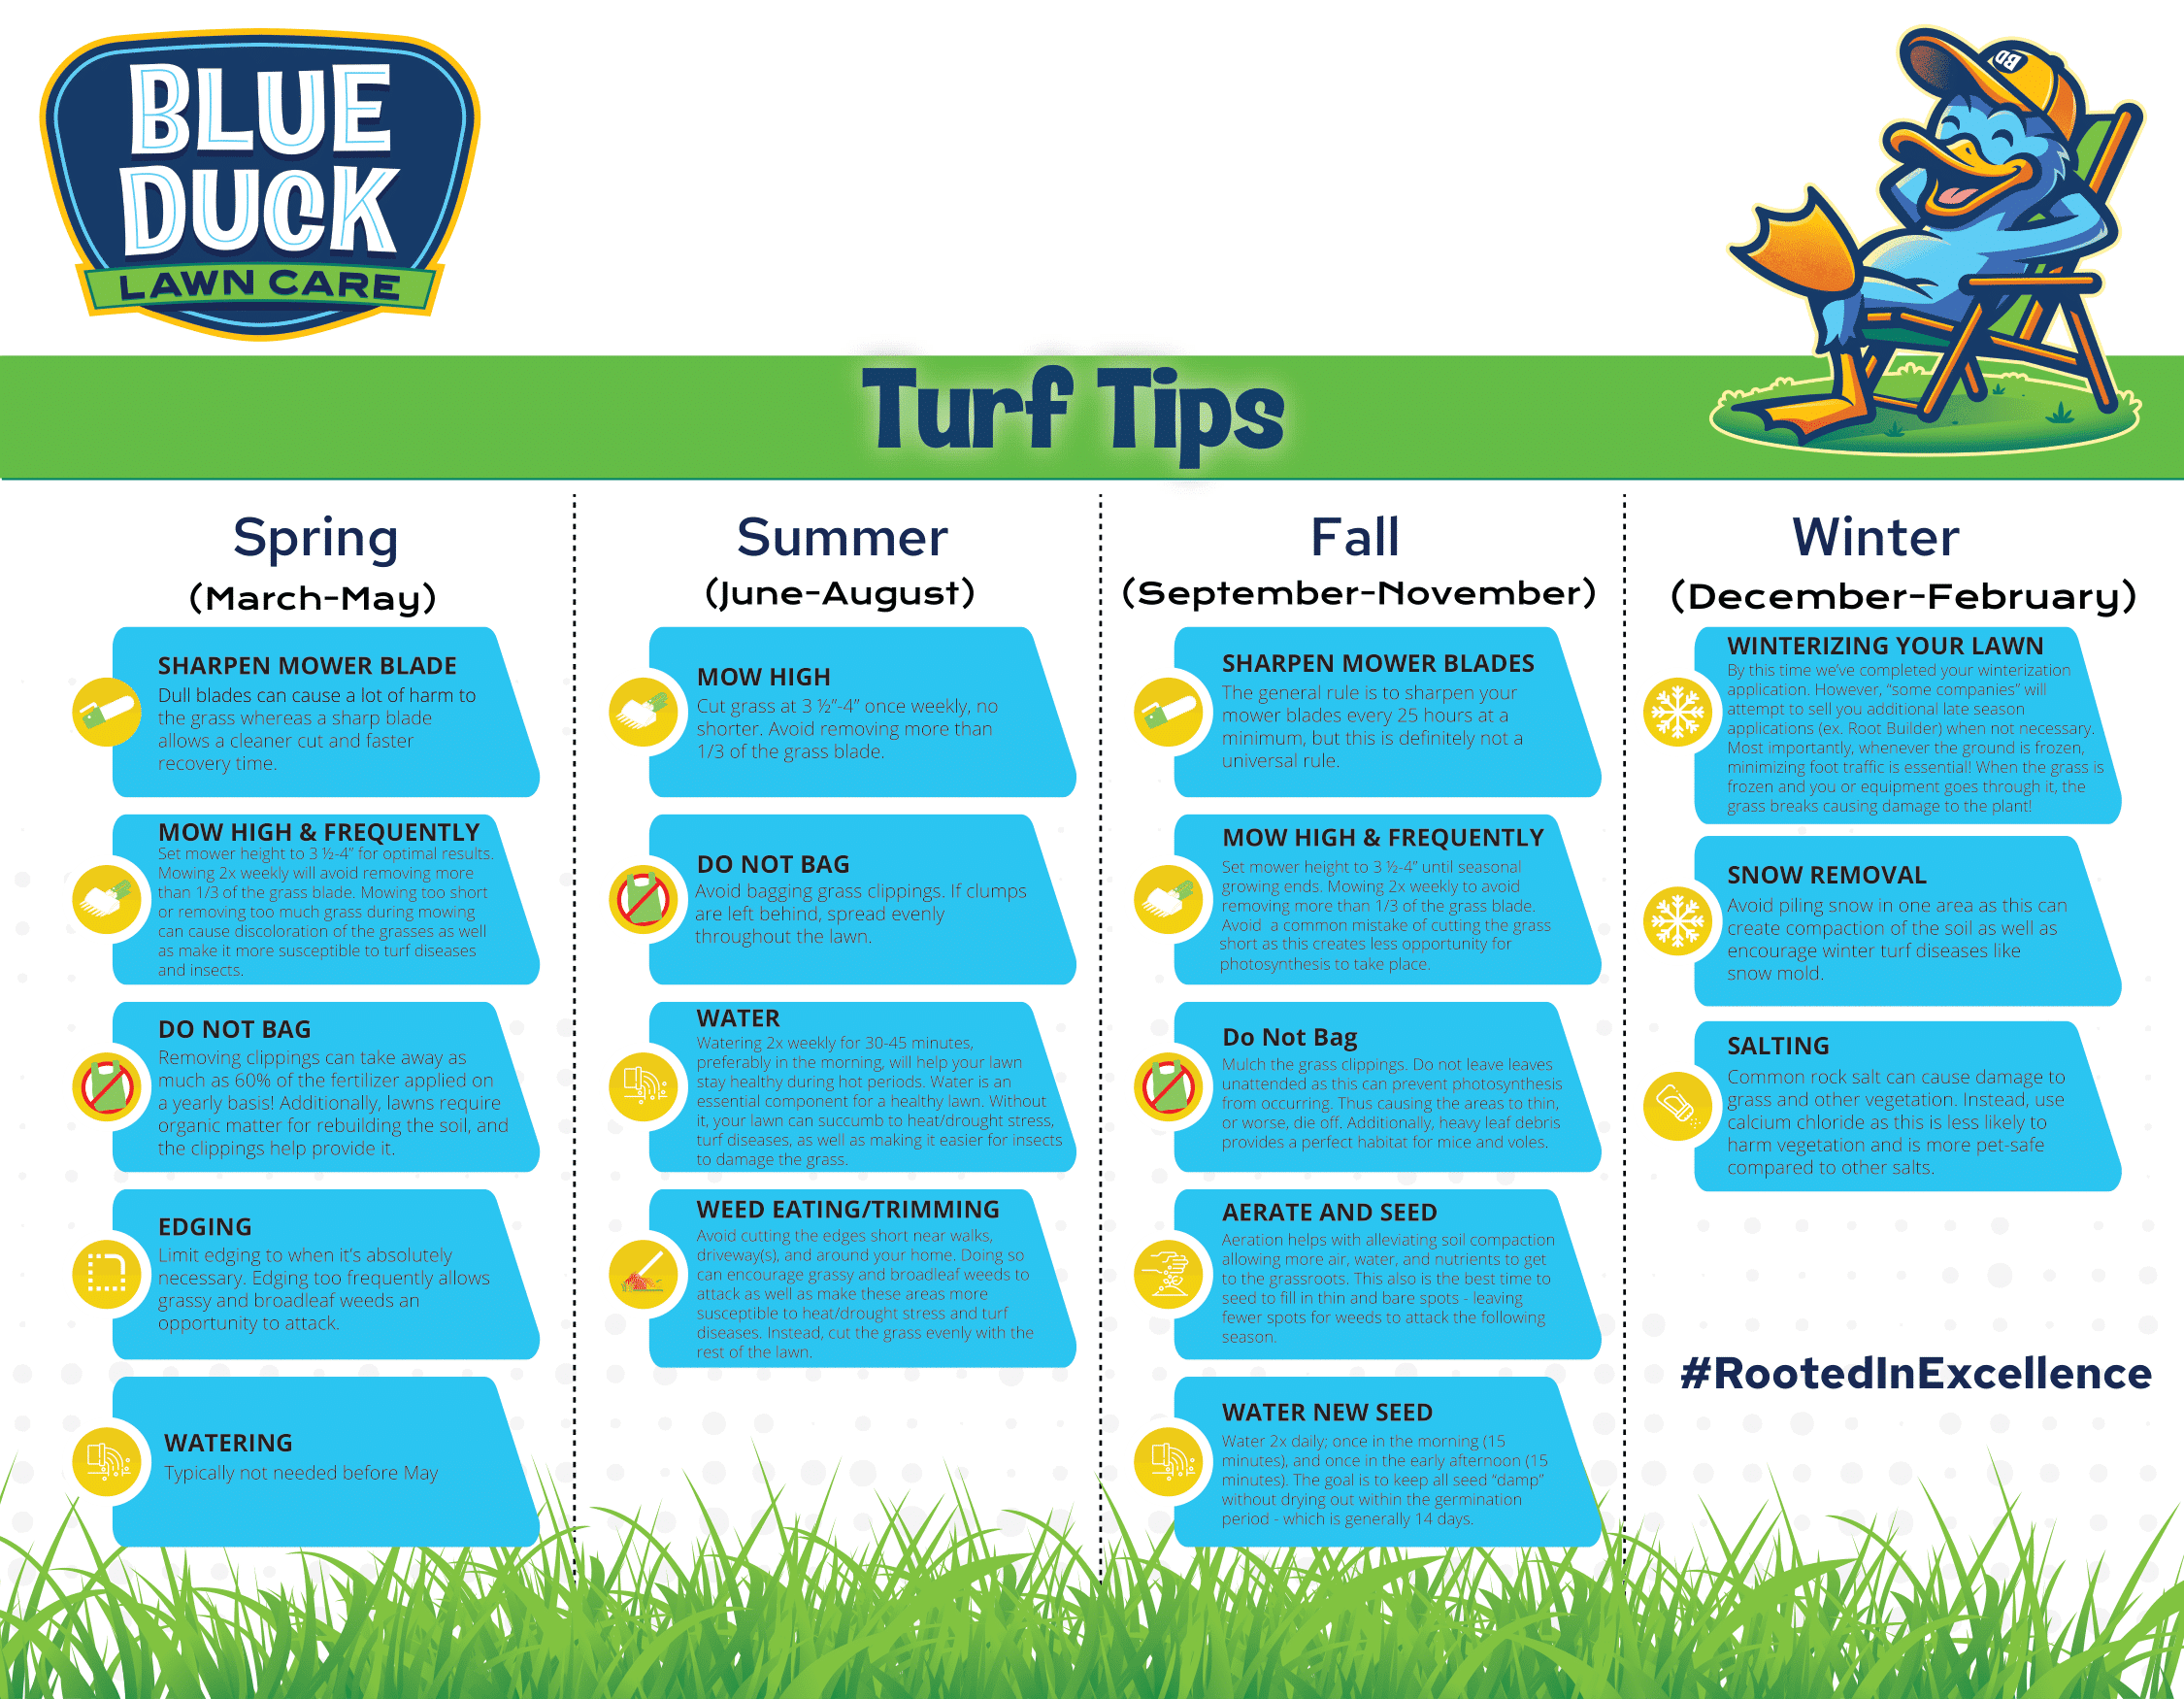 Turf Tips Guide